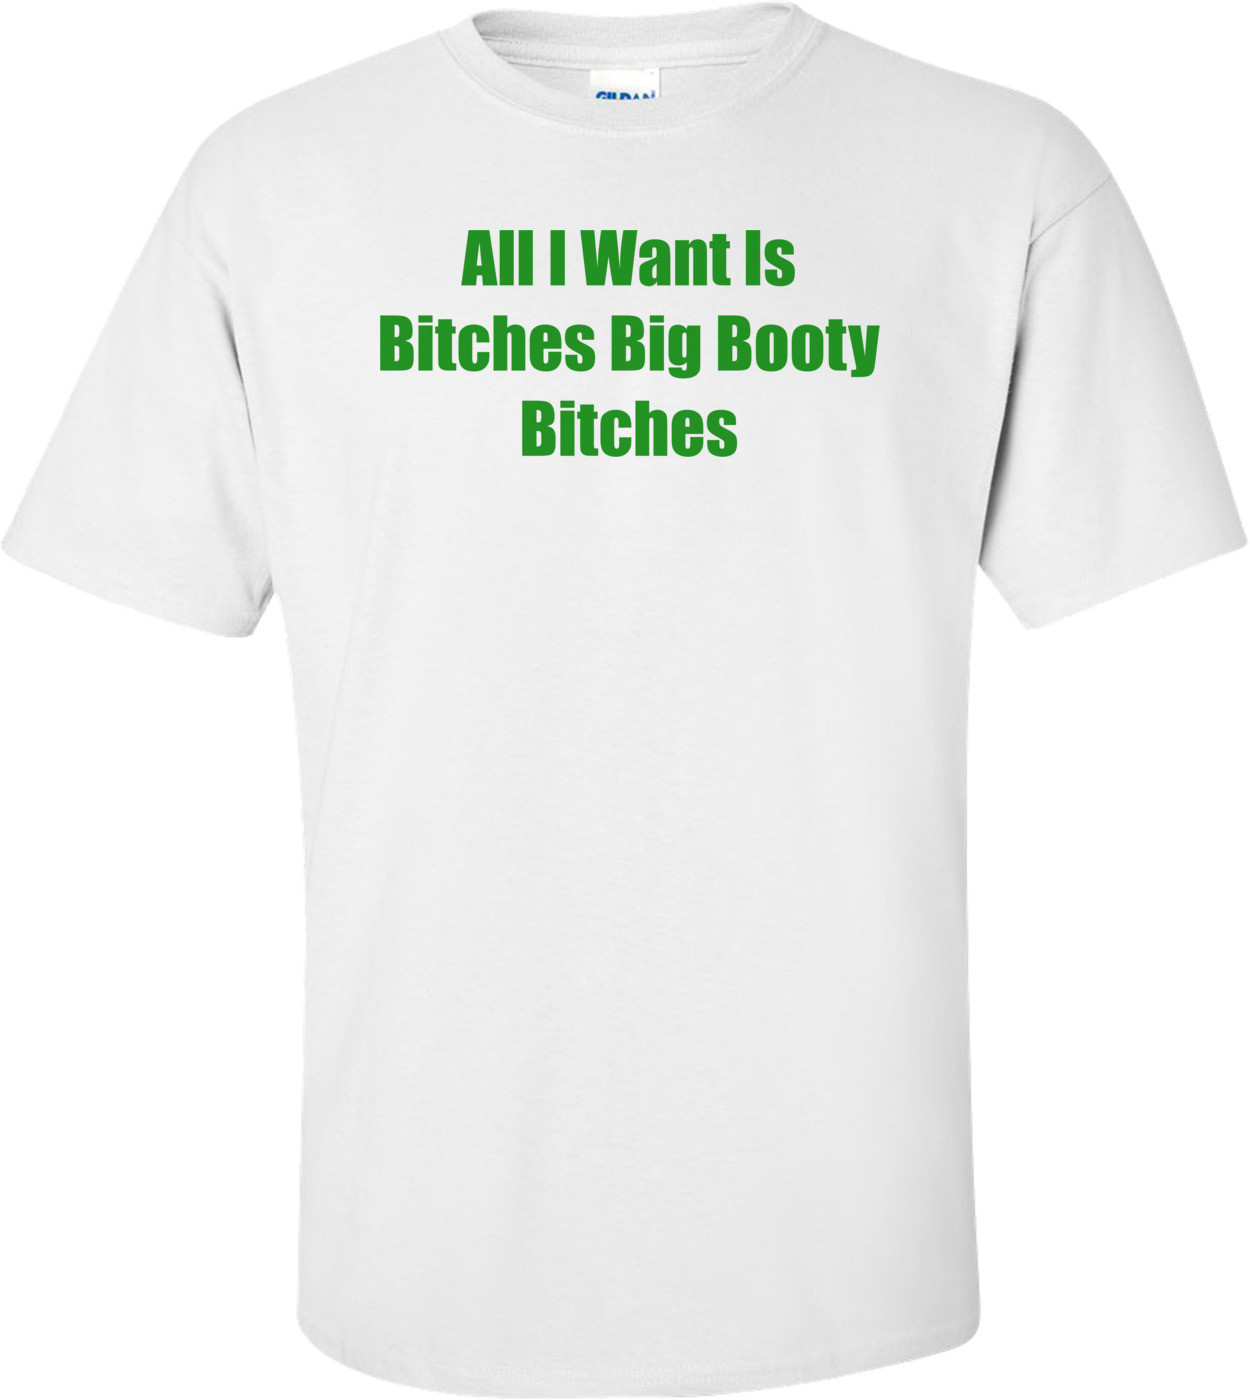 All I Want Is Bitches Big Booty Bitches Shirt